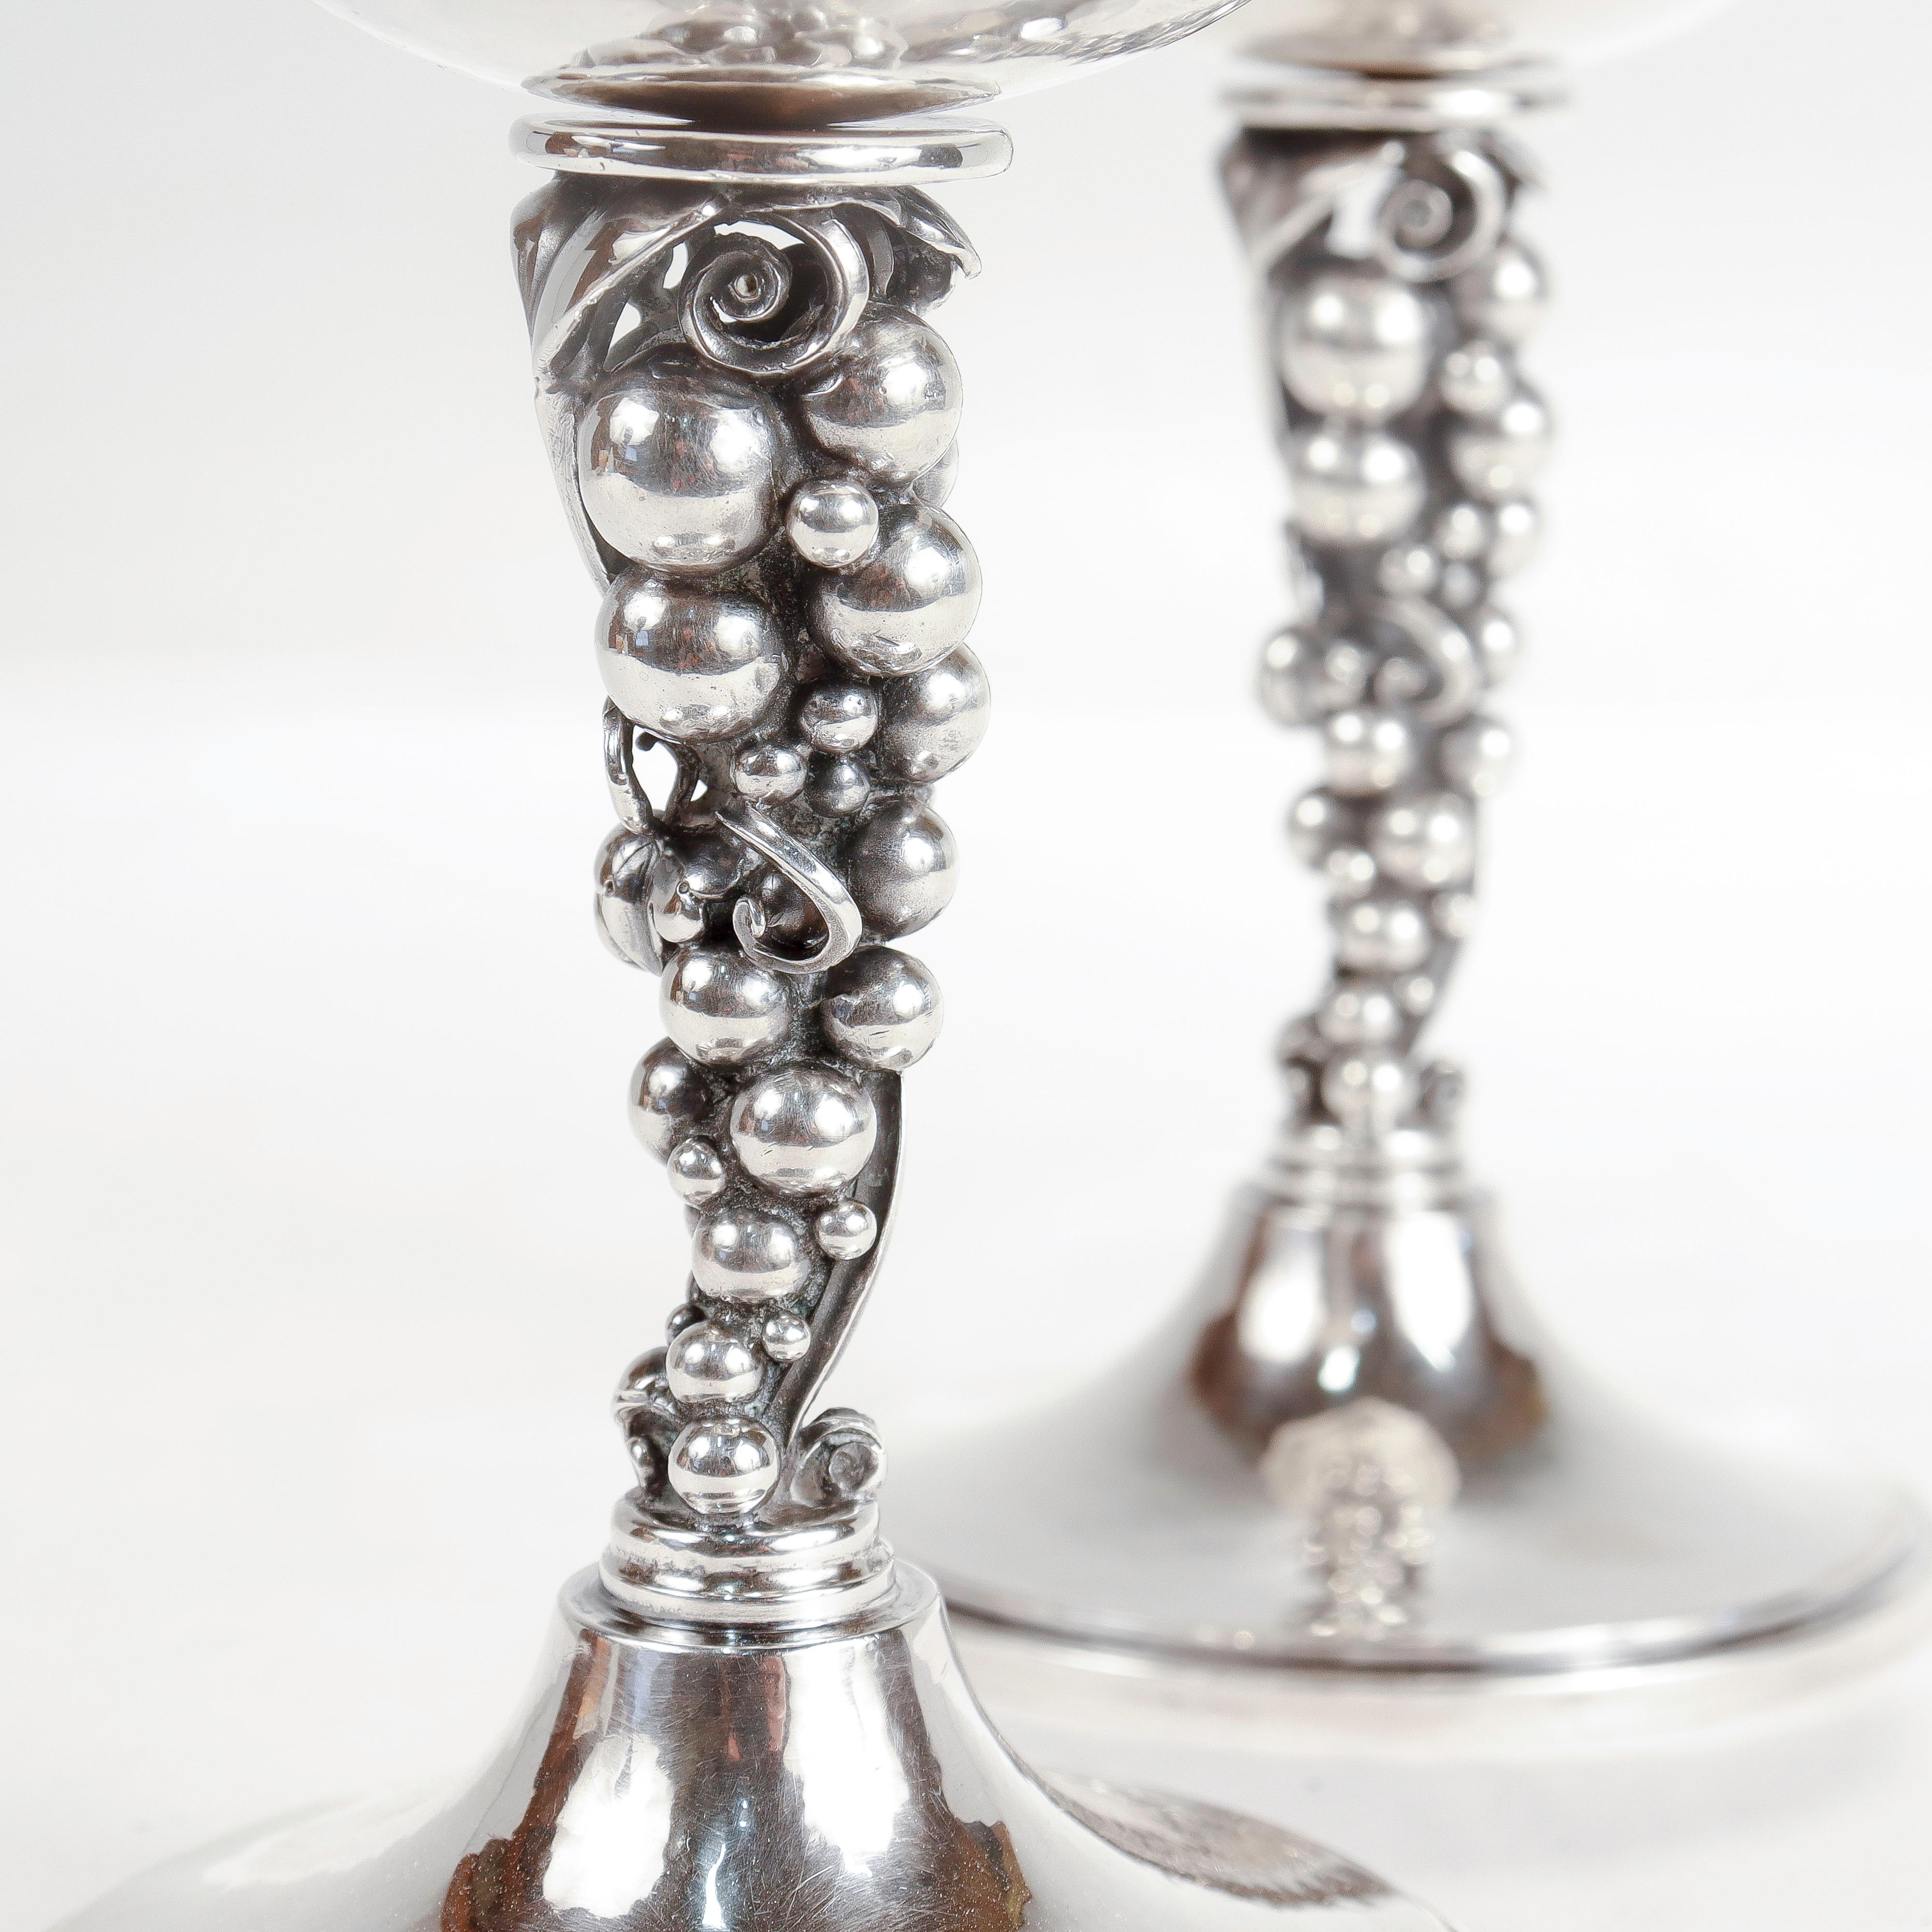 Pair of Signed Danish Modern Sterling Silver Grapes Candlesticks by Aage Weimar For Sale 5